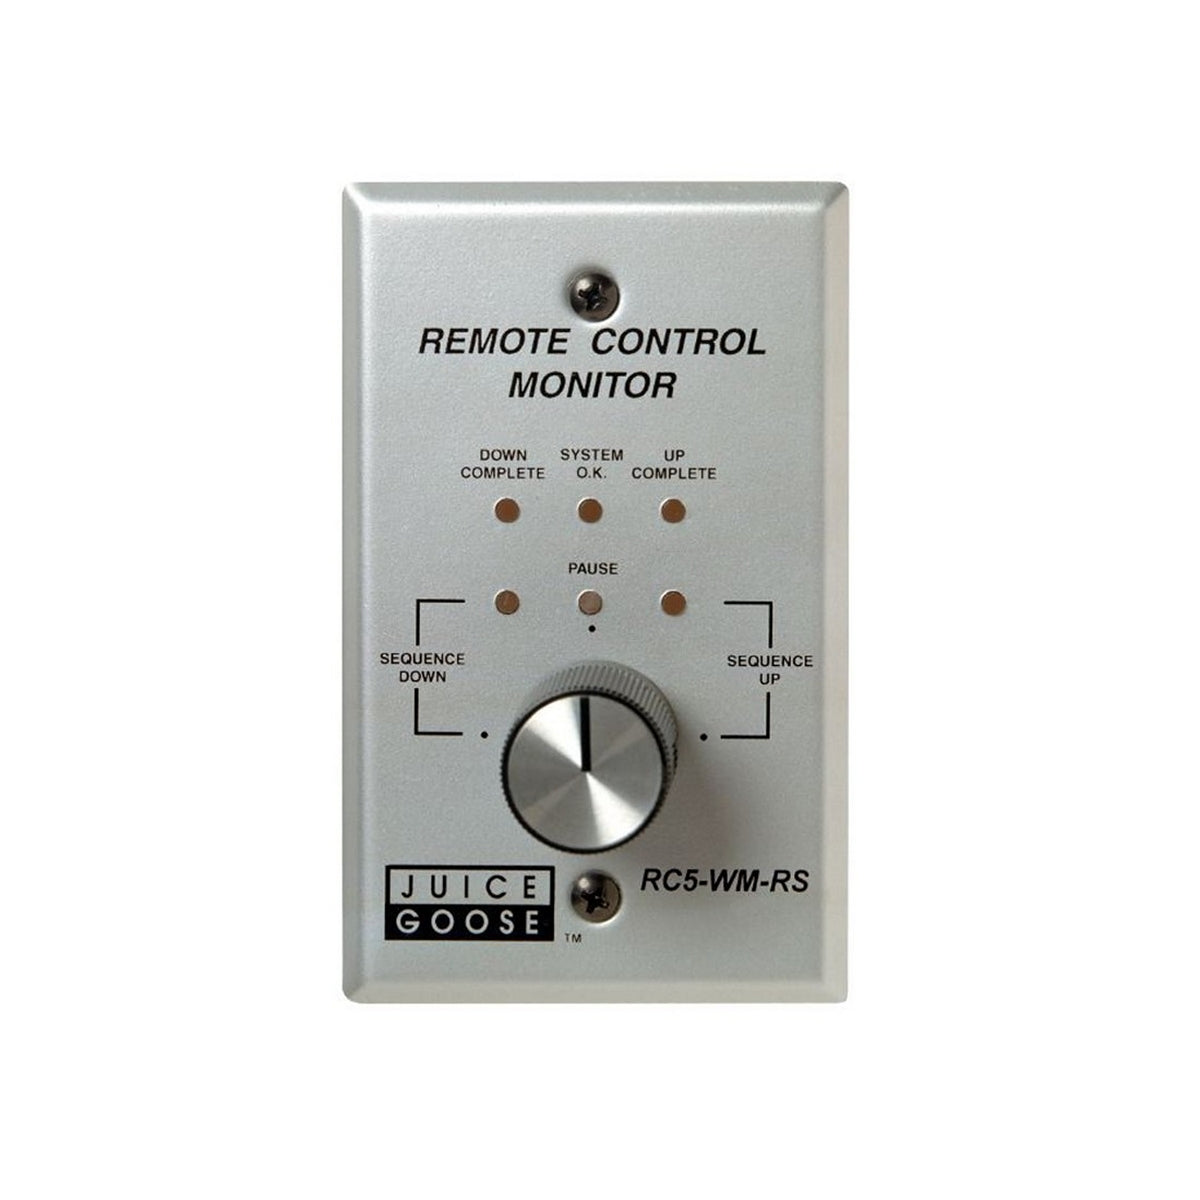 Juice Goose RC5 WM-RS Wall Mounted Rotary Knob Remote Control for CQ Products